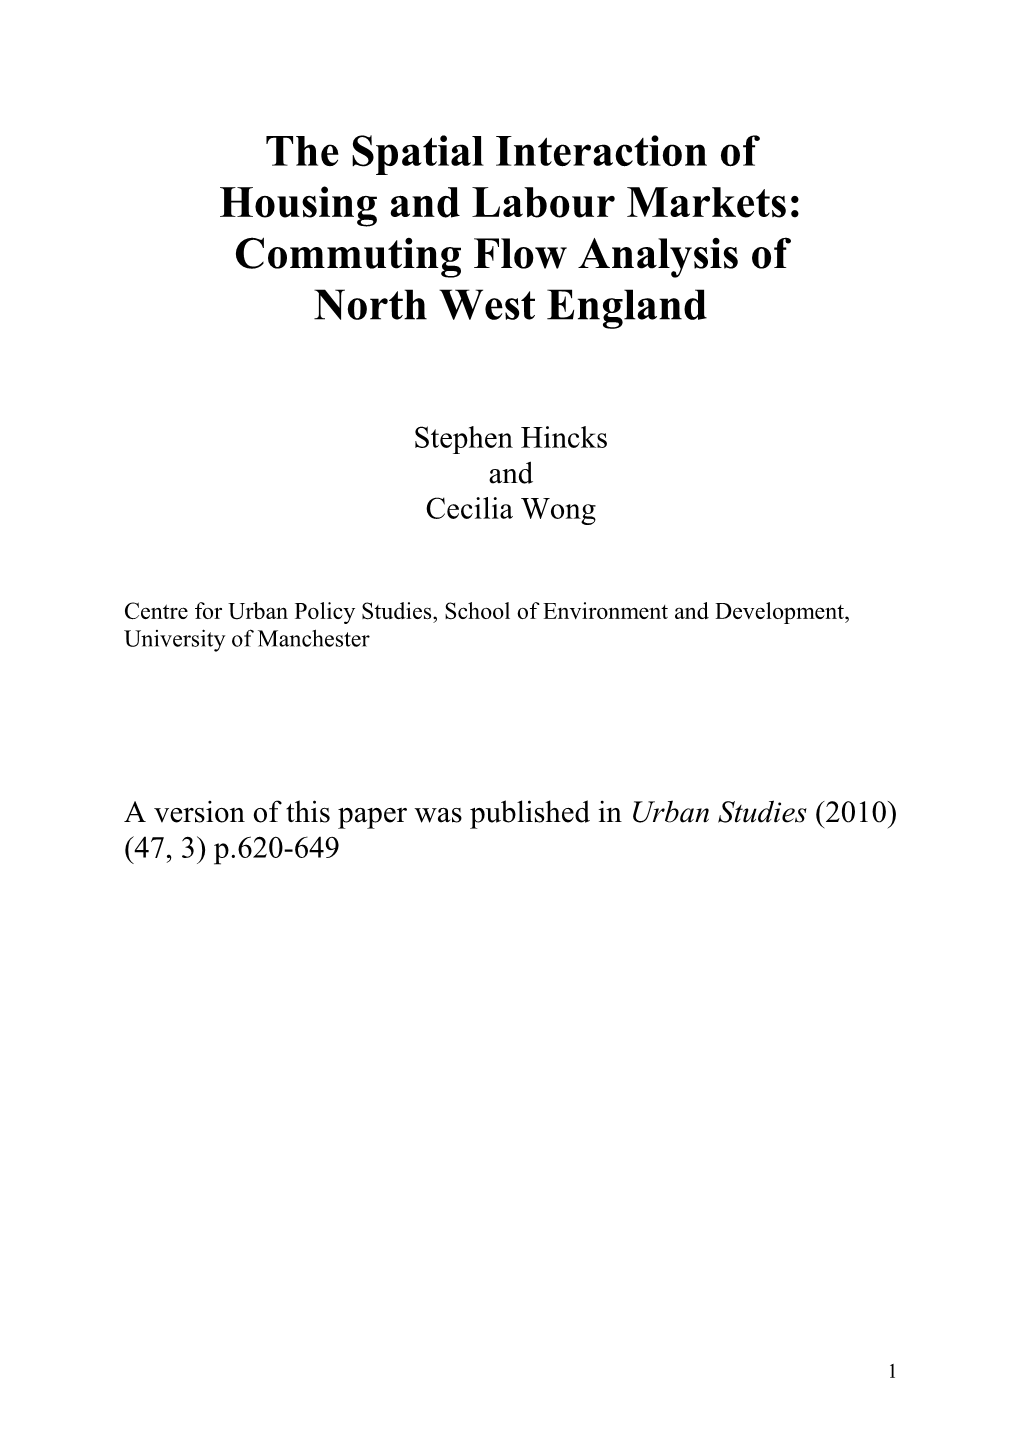 Commuting Flow Analysis of North West England